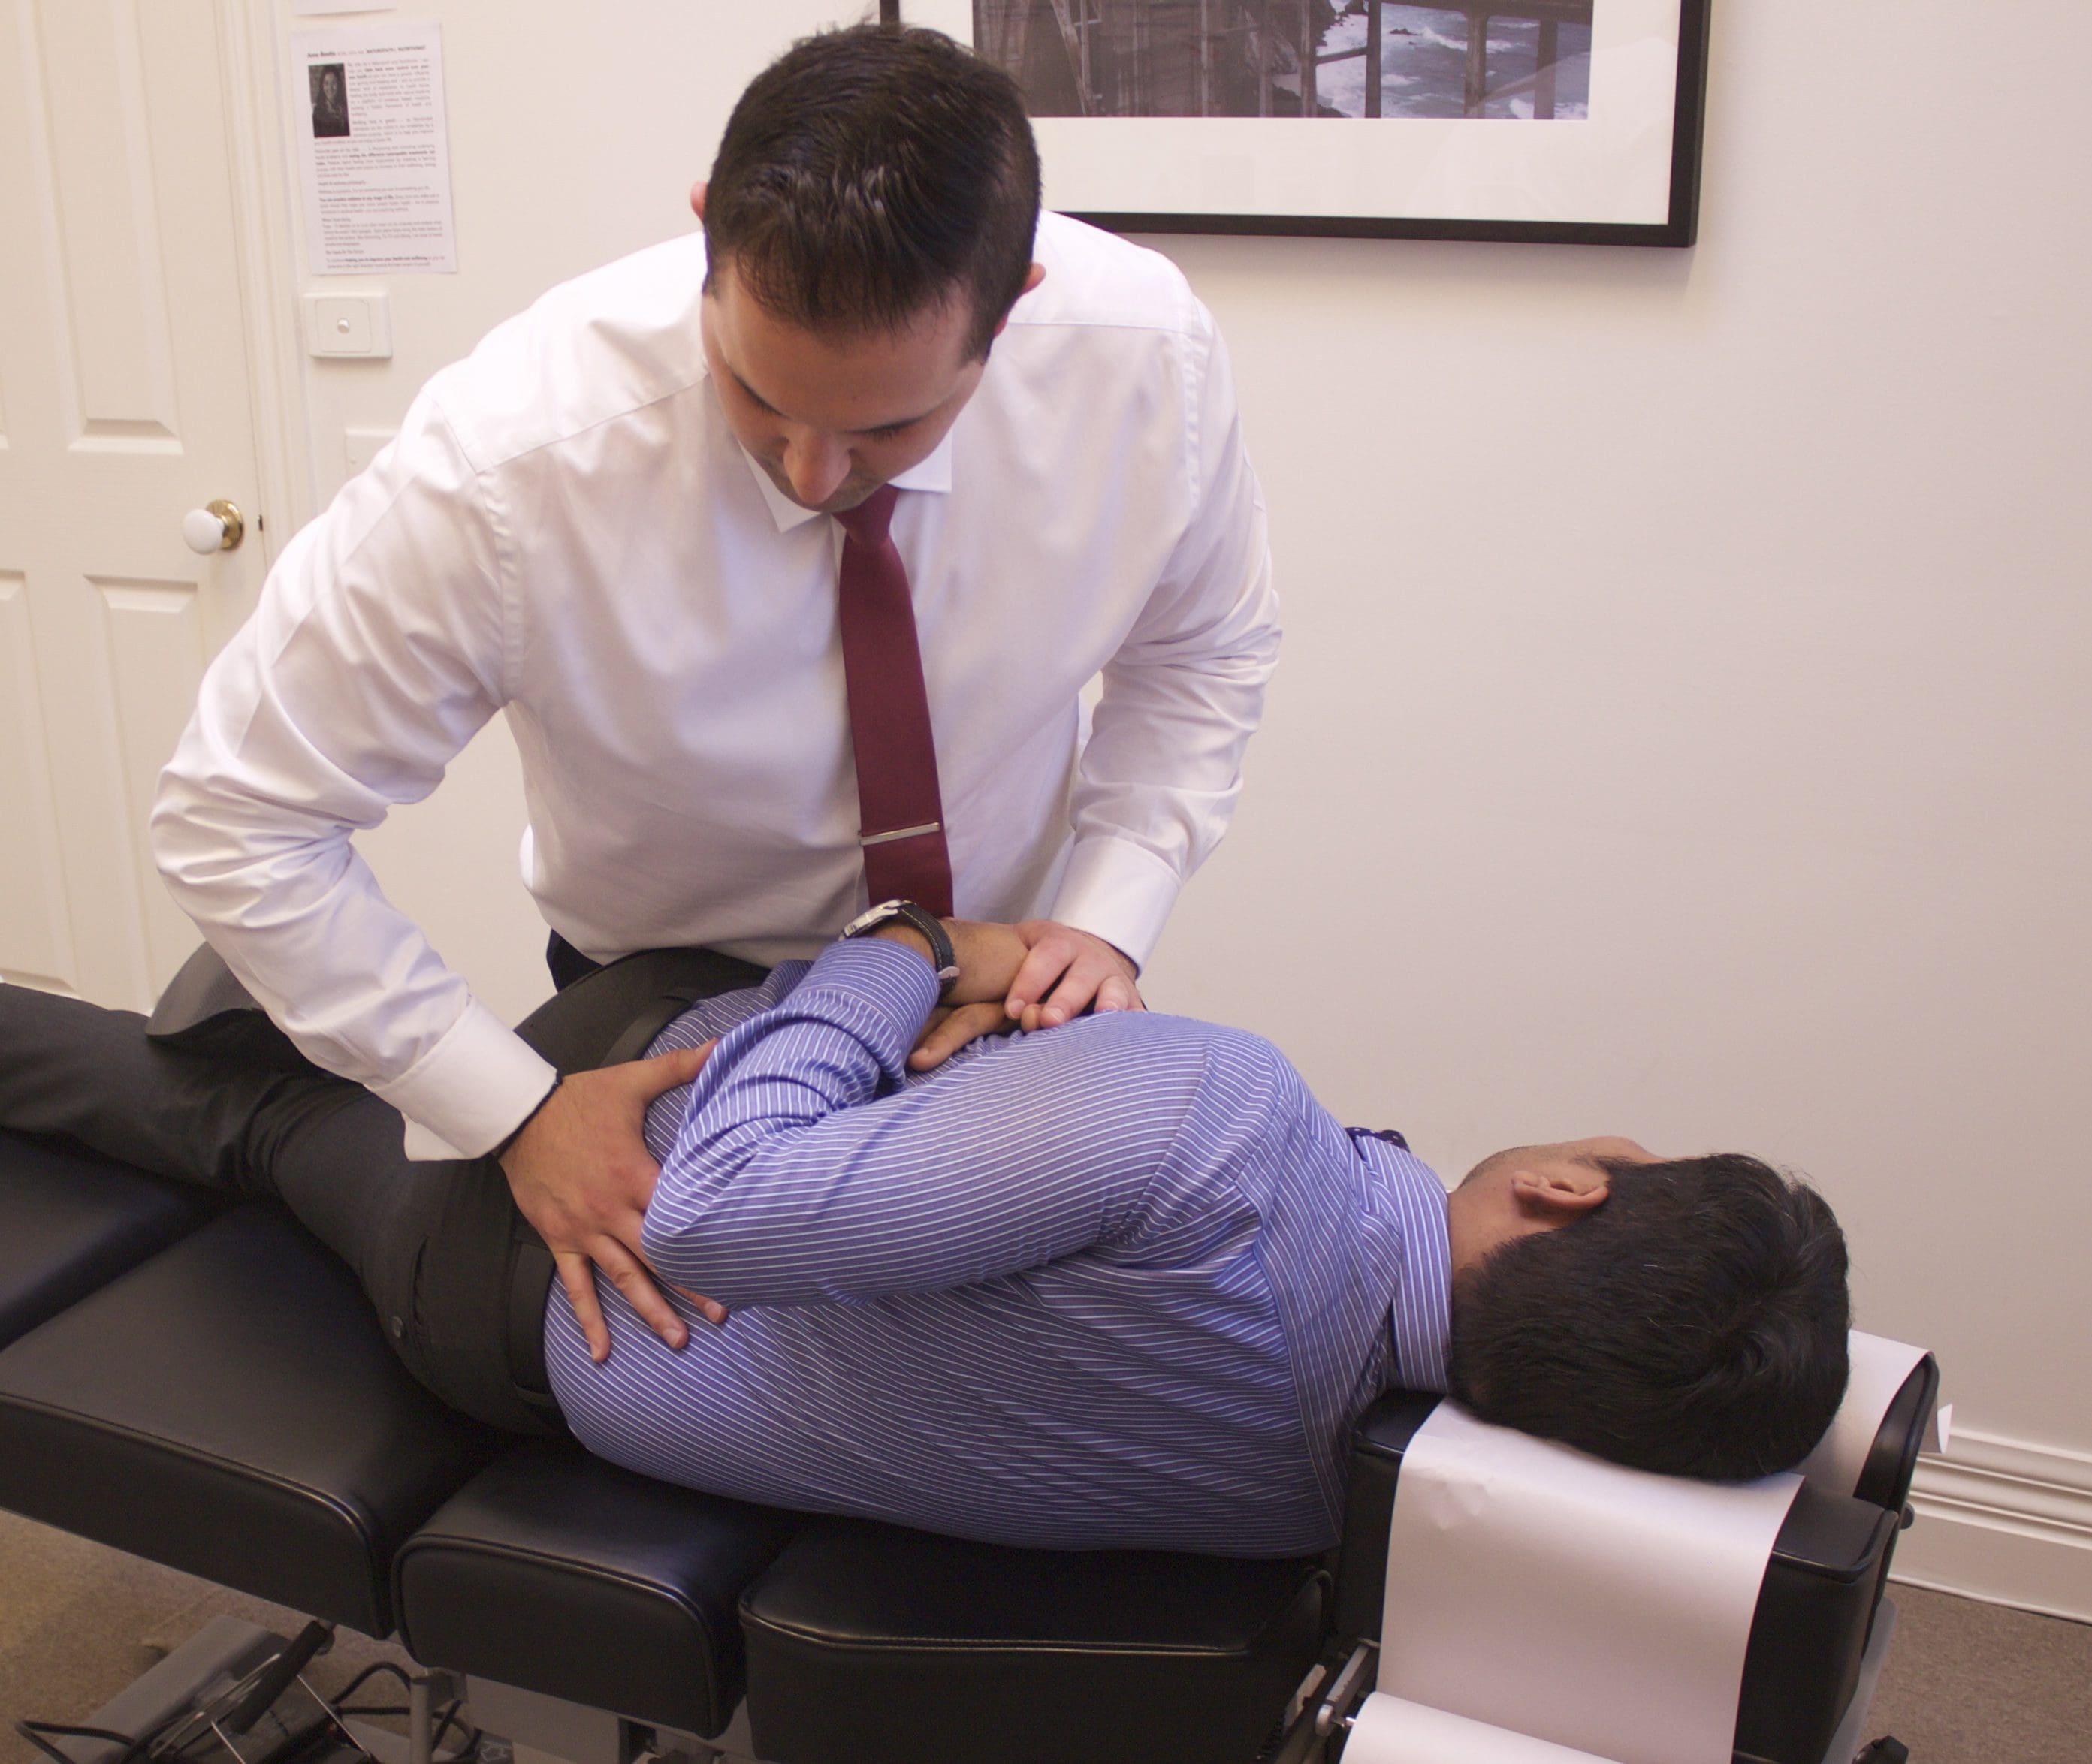 Image of a chiropractor performing spinal adjustments and manual manipulations for low back pain and sciatica.